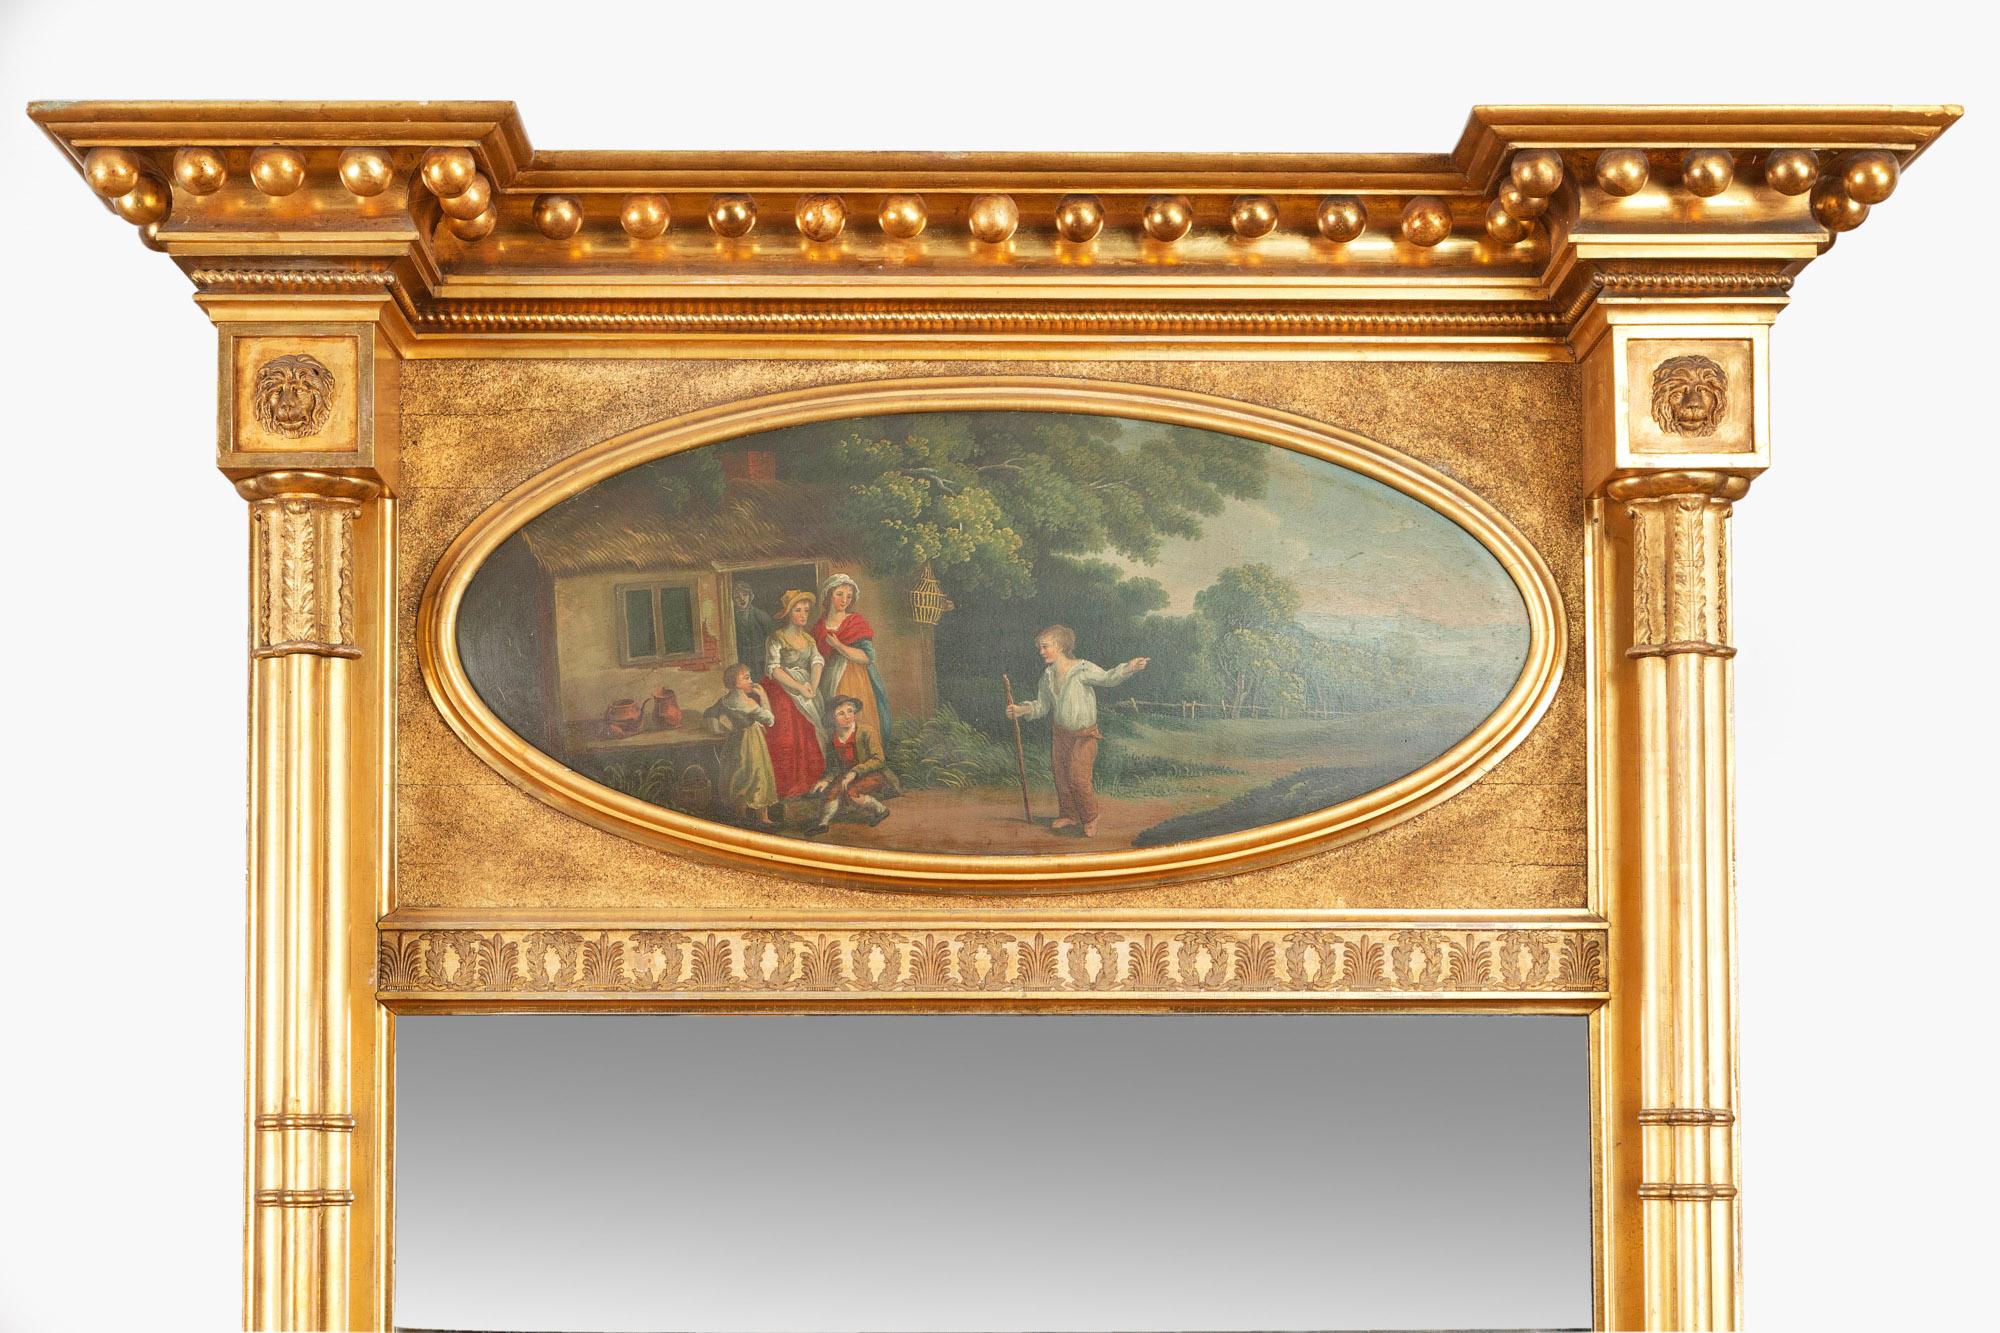 36K
Early 19th century Regency giltwood trumeau pier mirror, the overhanging broken pediment stepped cornice with ball decoration and rope twist detail raised over sanded frieze with moulded cartouche of oval form encasing an oil painting depicting